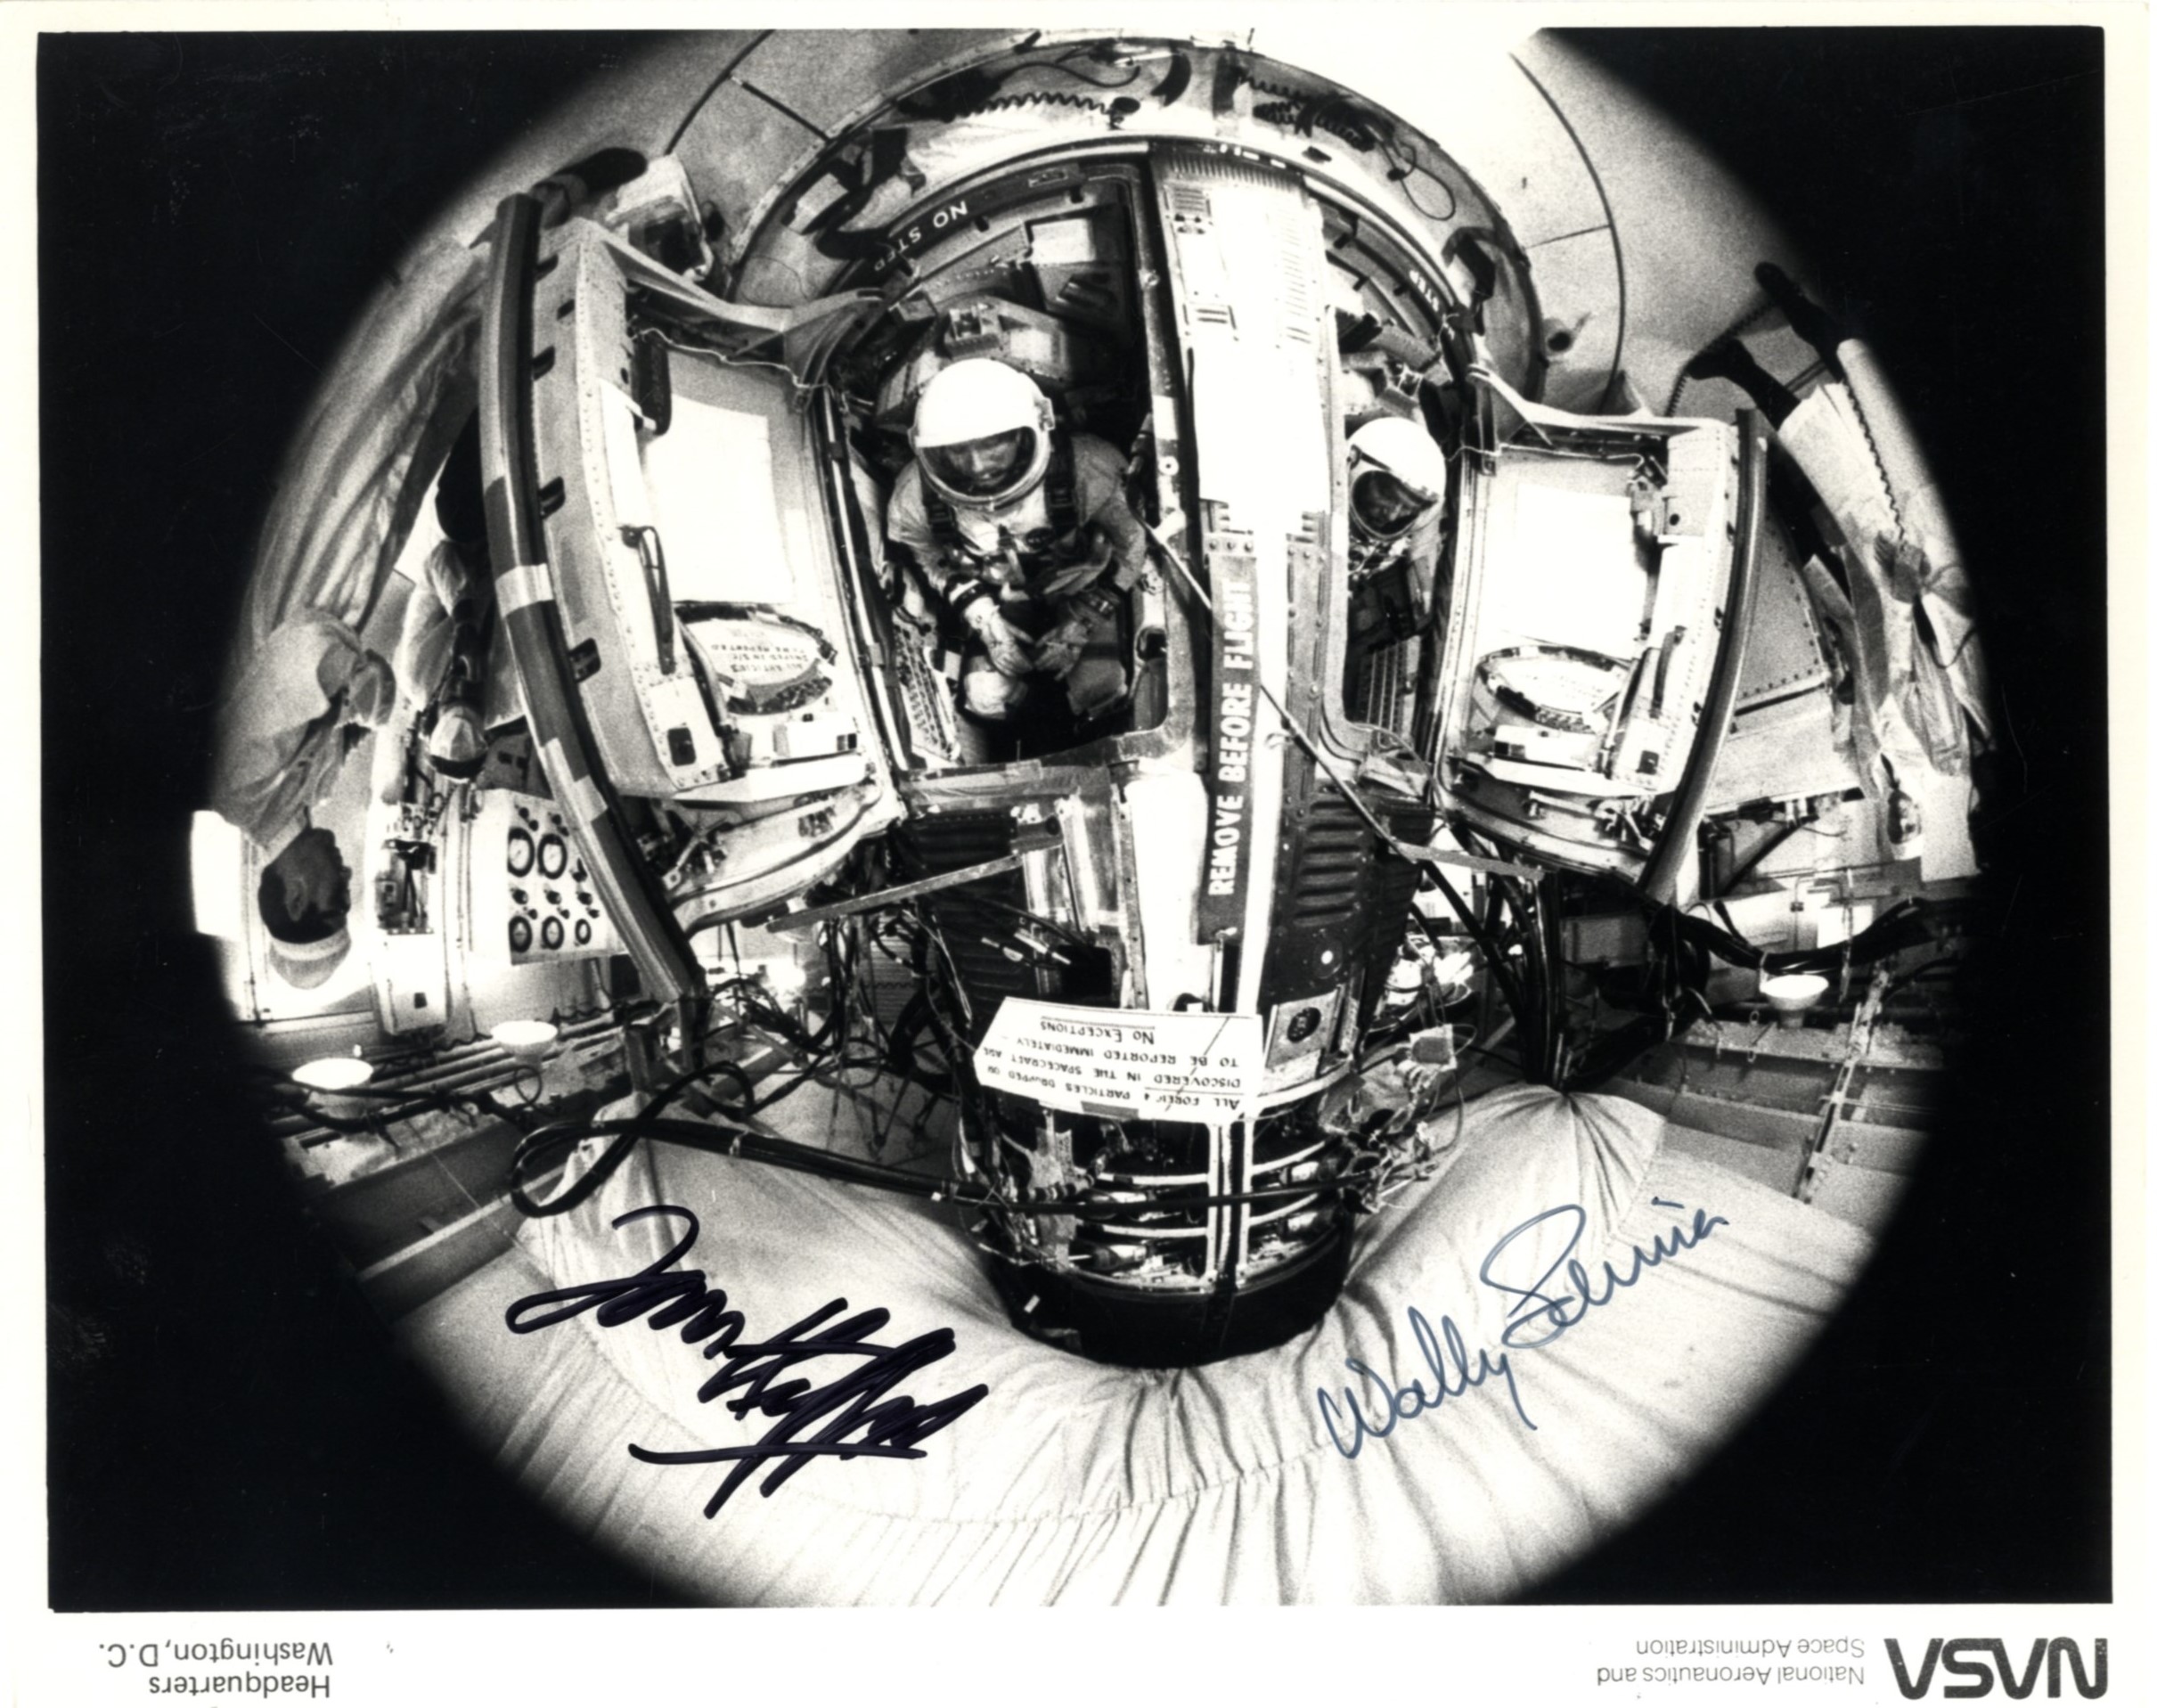 GEMINI VI-A: Signed 10 x 8 photograph by the two crew members of Gemini VI-A individually,